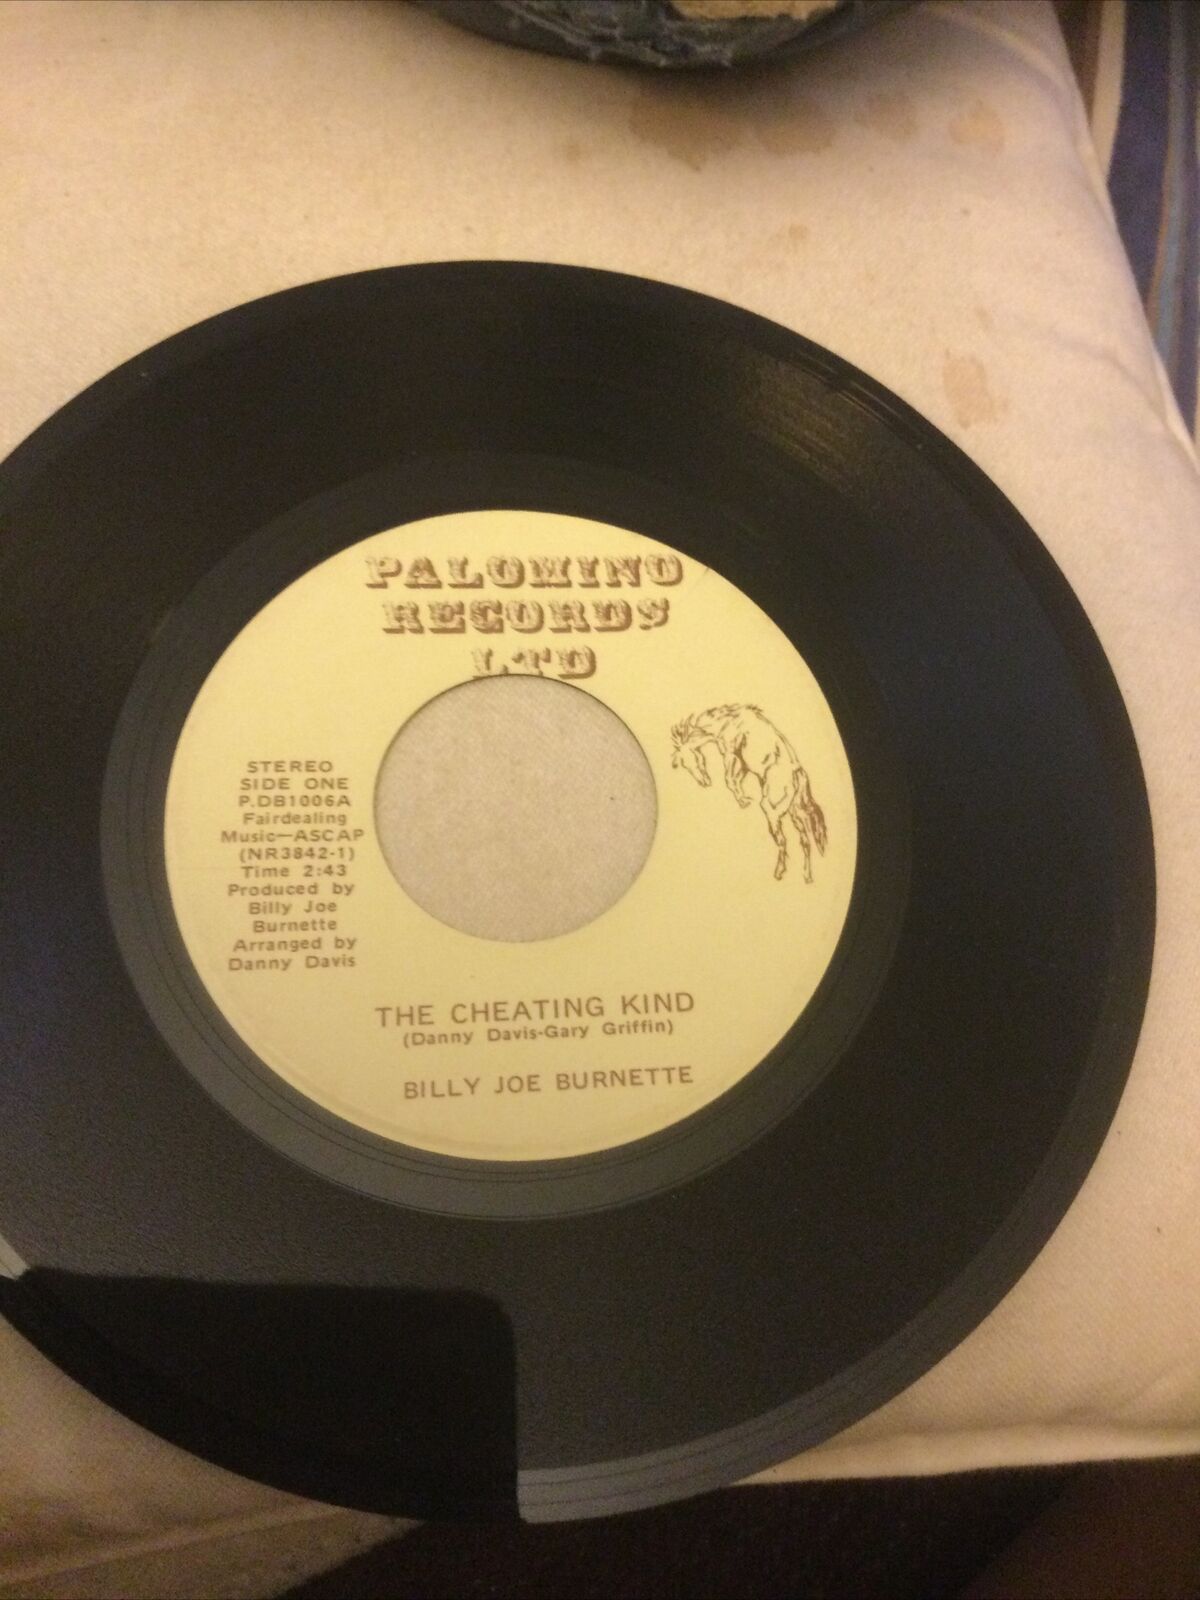 Billy Joe Burnette - Standing In The Shadows/The Cheating Kind 45 Palomino Recor